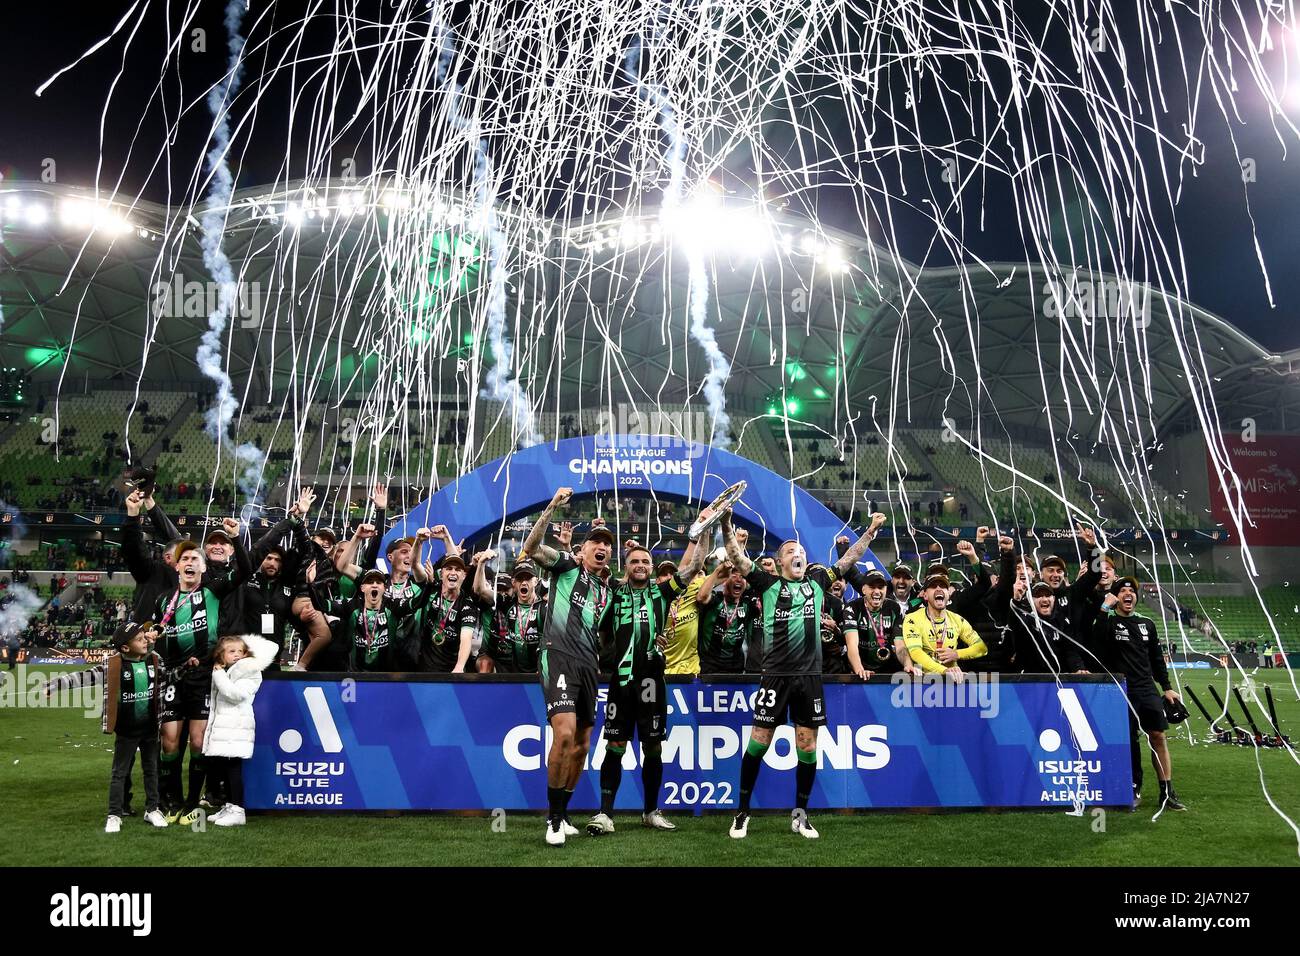 Melbourne, Australia, 28 May, 2022. Western United celebrate winning the Grand Final during the A-League Grand Final soccer match between Melbourne City FC and Western United at AAMI Park on May 28, 2022 in Melbourne, Australia. Credit: Dave Hewison/Speed Media/Alamy Live News Stock Photo